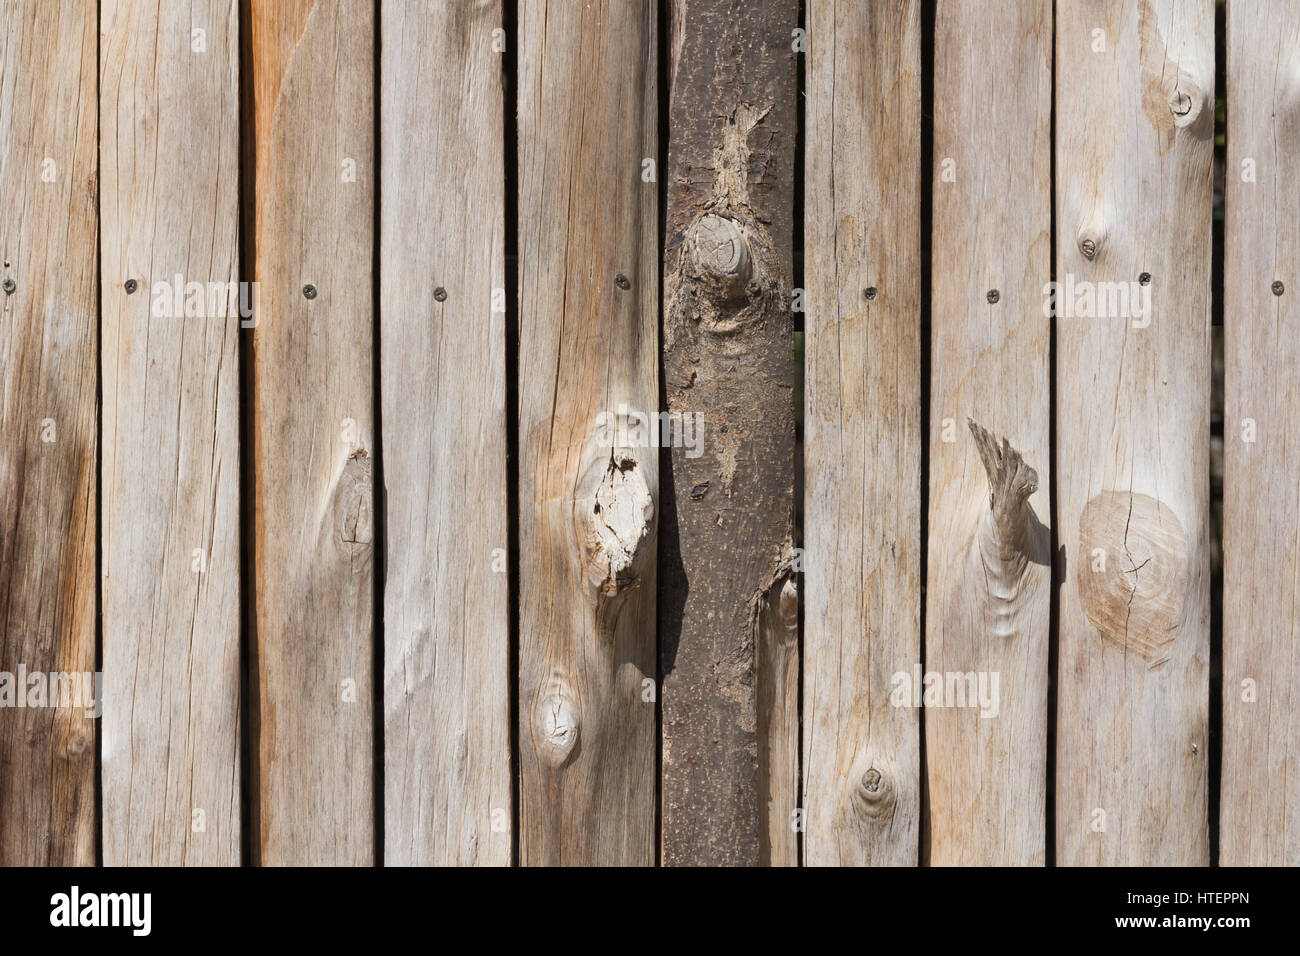 rustic weathered barn wood background with knots and nail holes Stock Photo